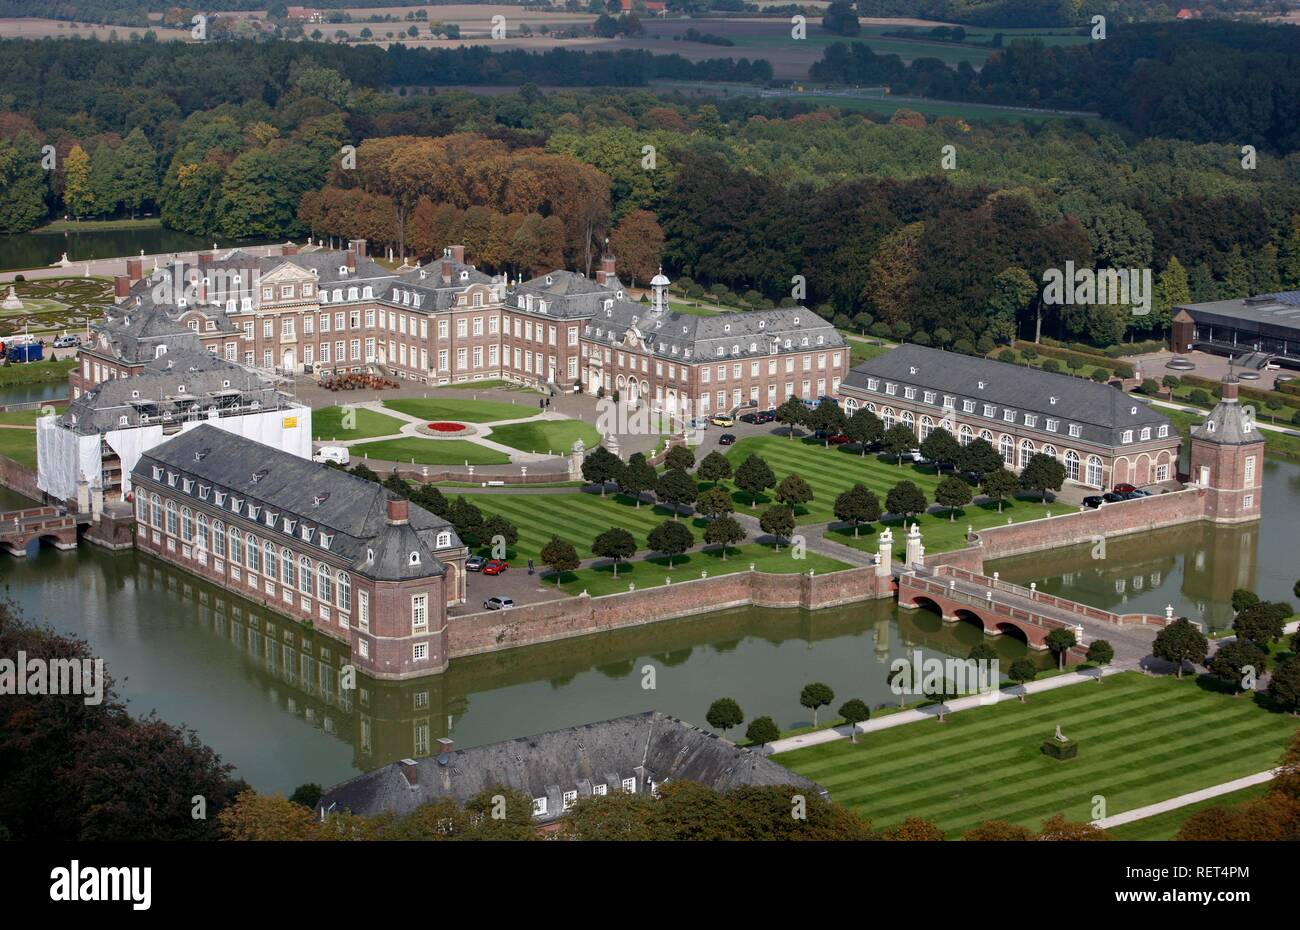 Nordkirchen Castle, largest moated castle in Westphalia, which includes, among others, the finance university North Stock Photo